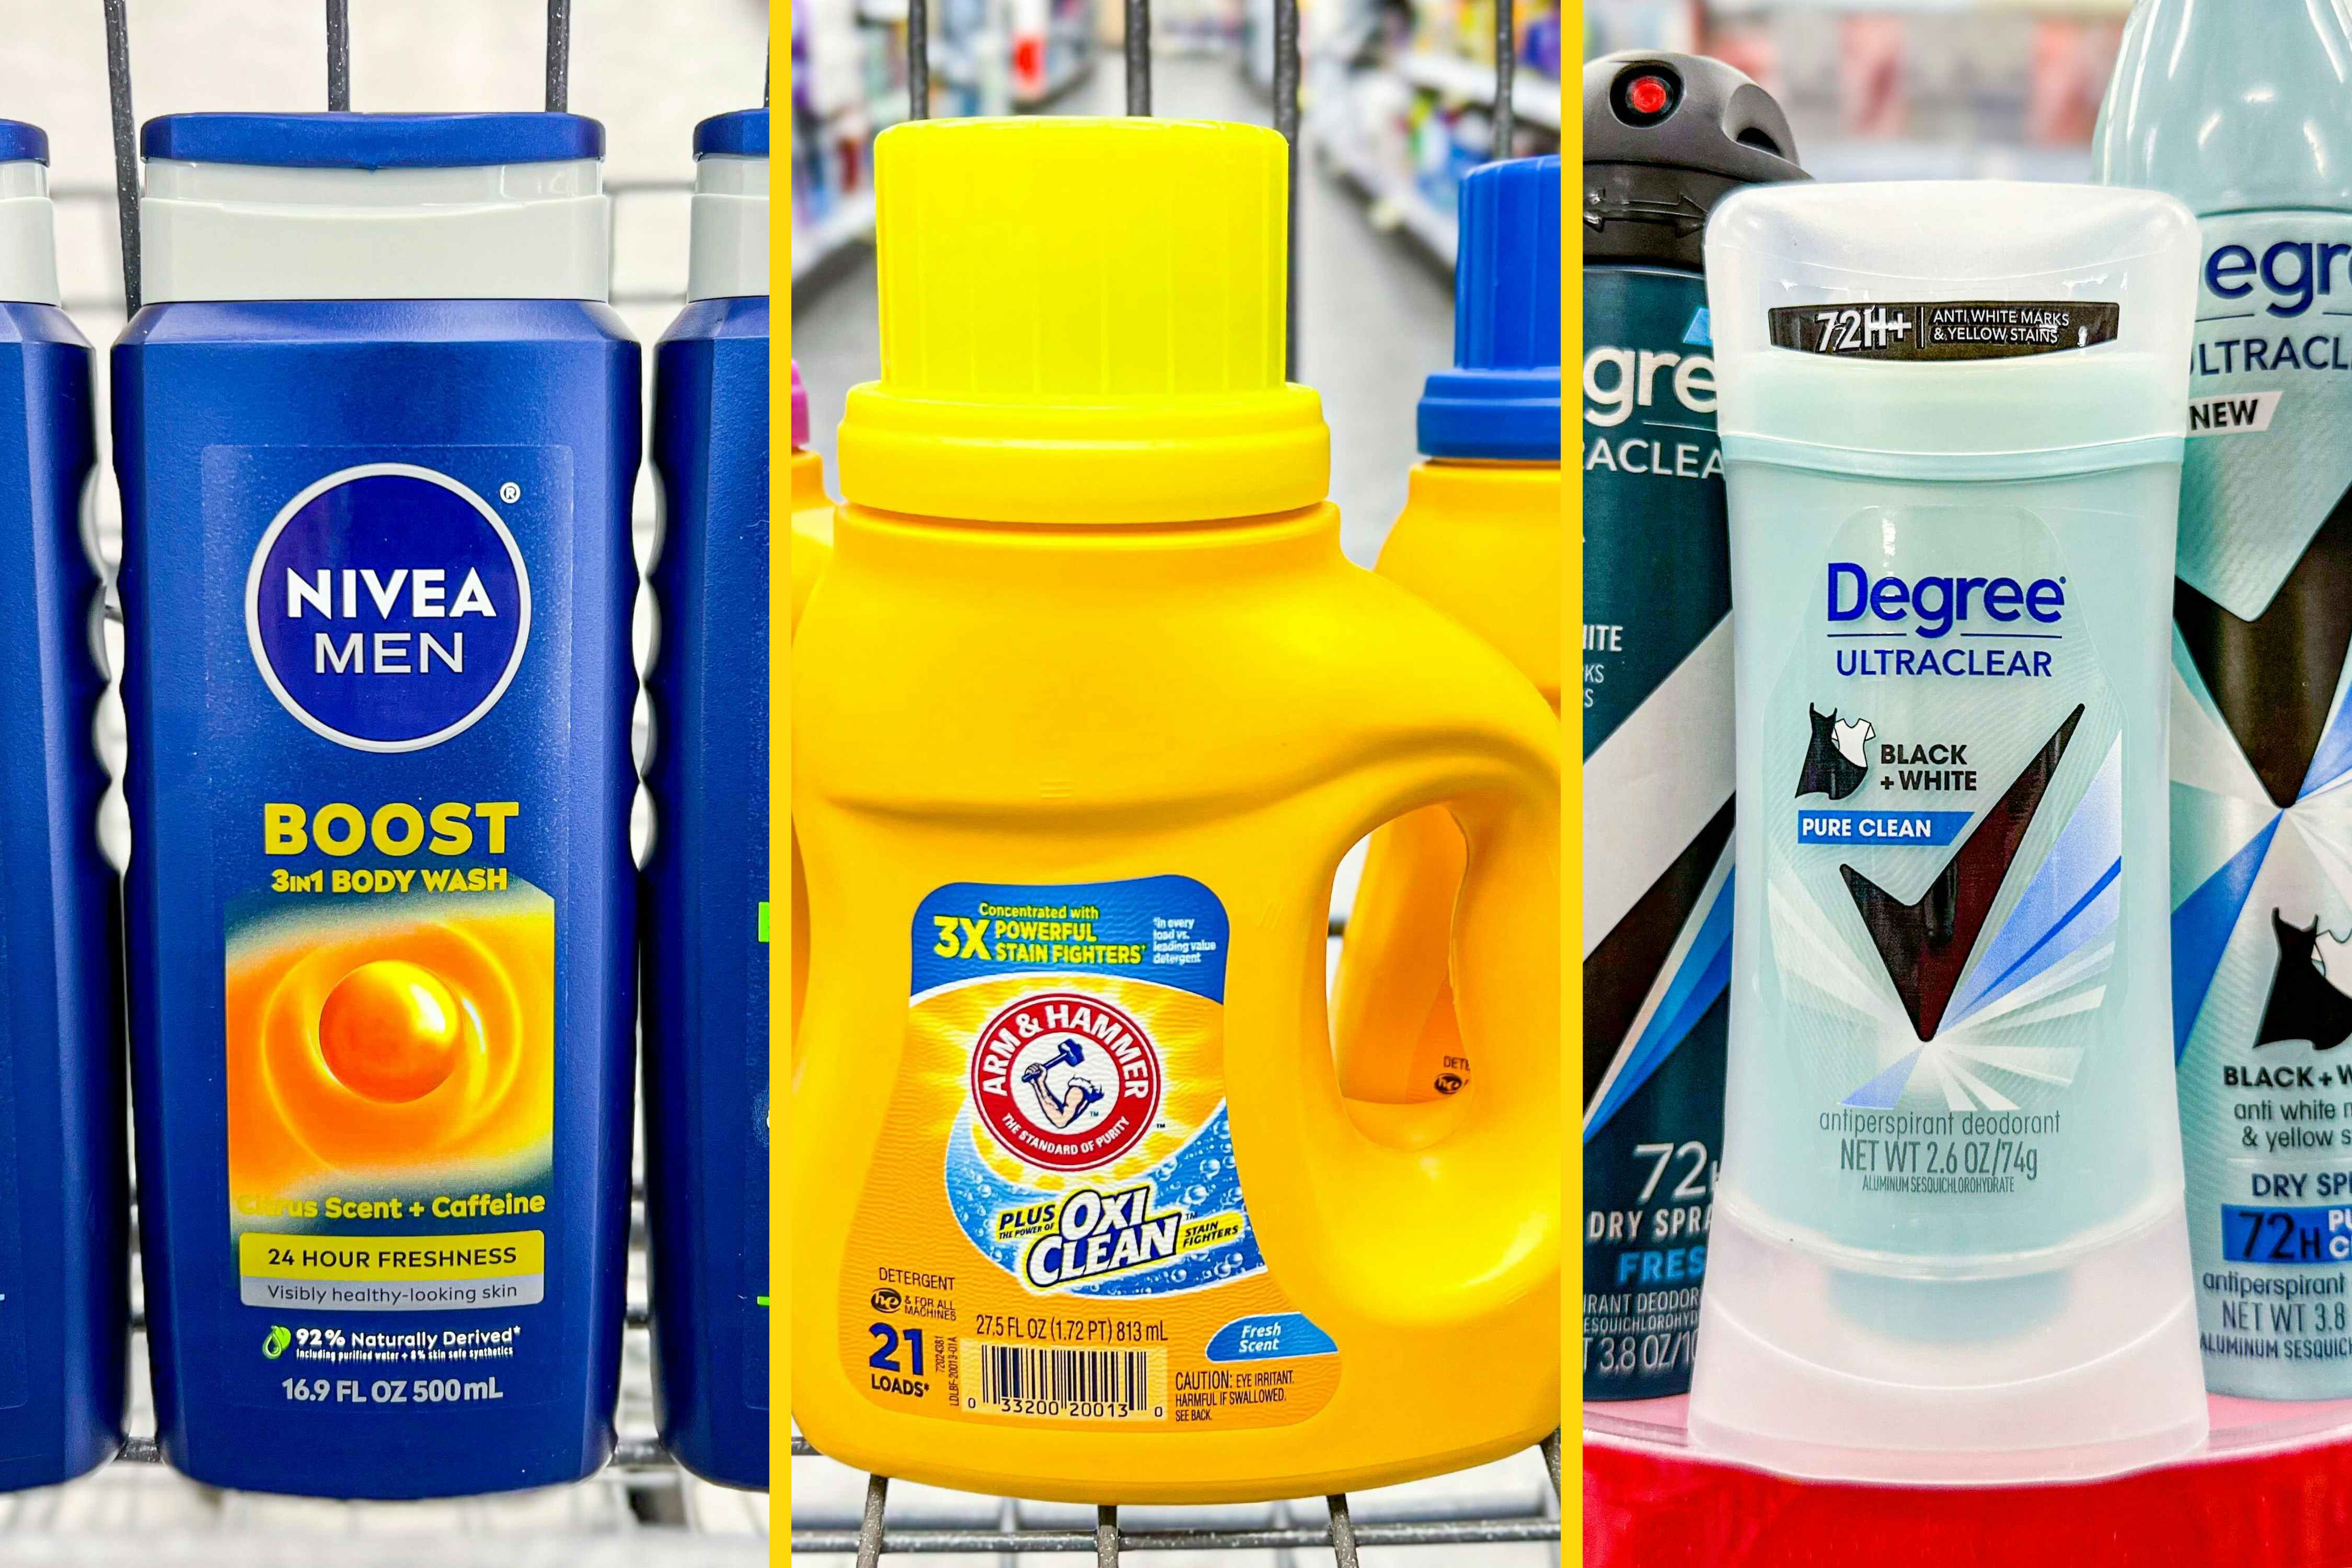 Best Coupon Deals This Week: Free Body Wash, $2 Detergent, and Much More